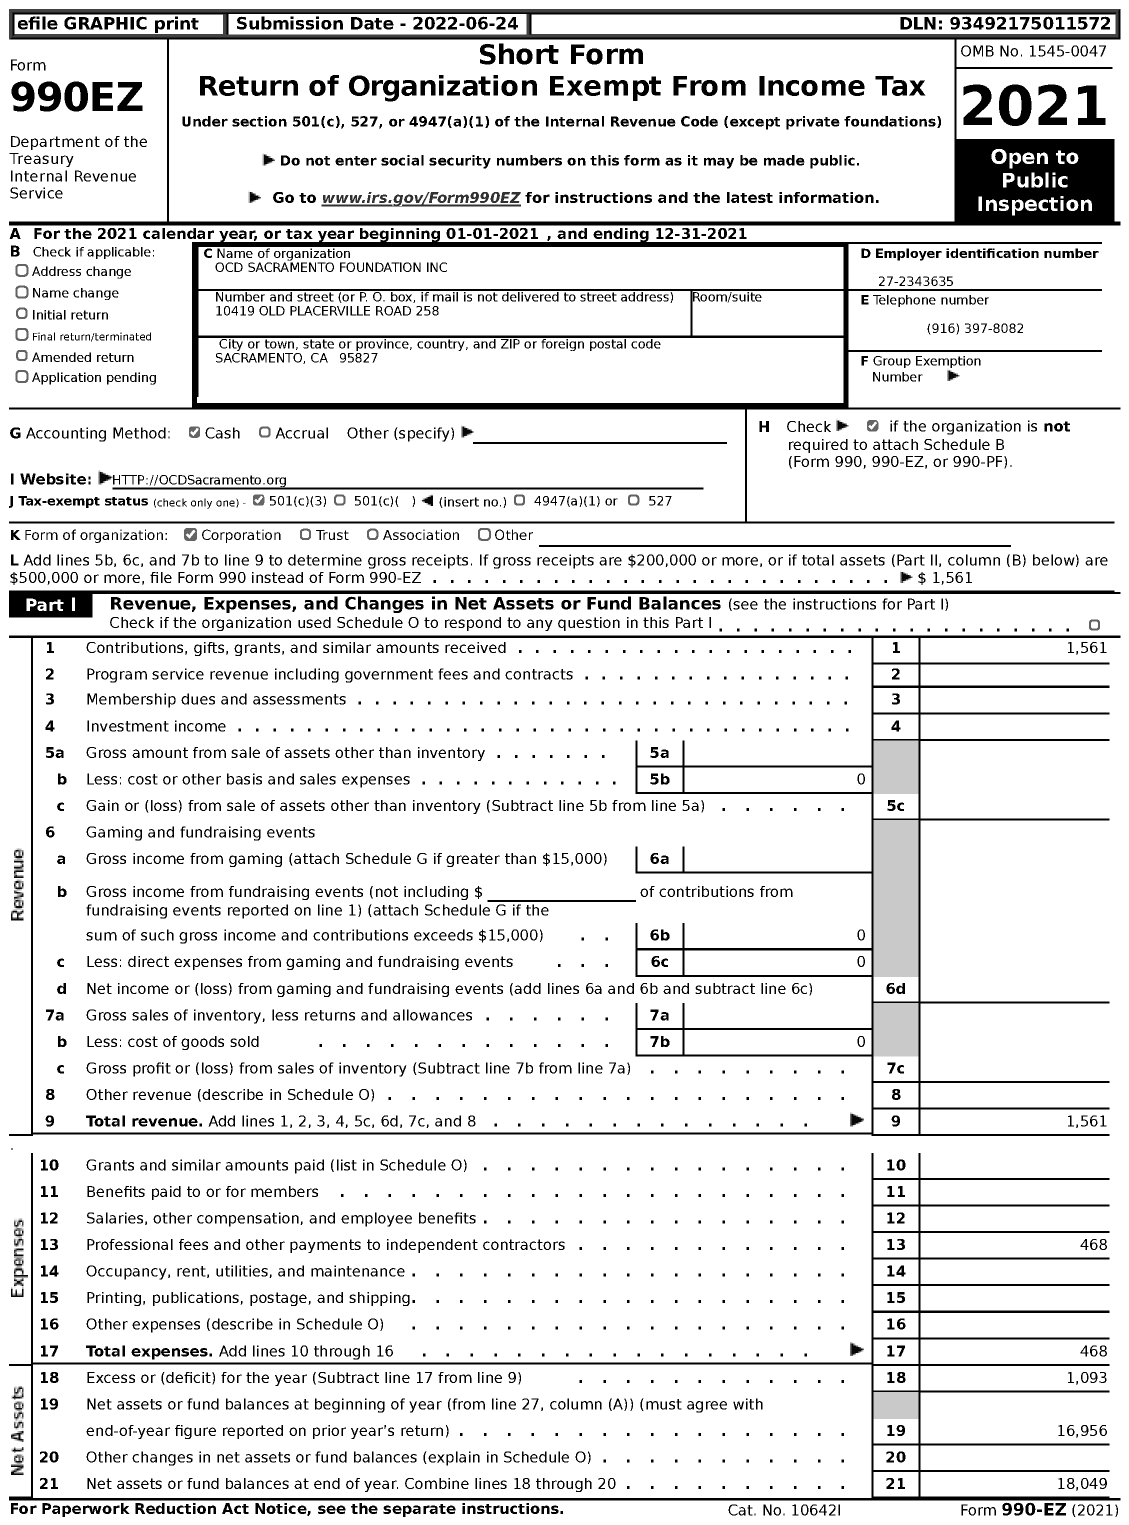 Image of first page of 2021 Form 990EZ for Ocd Sacramento Foundation